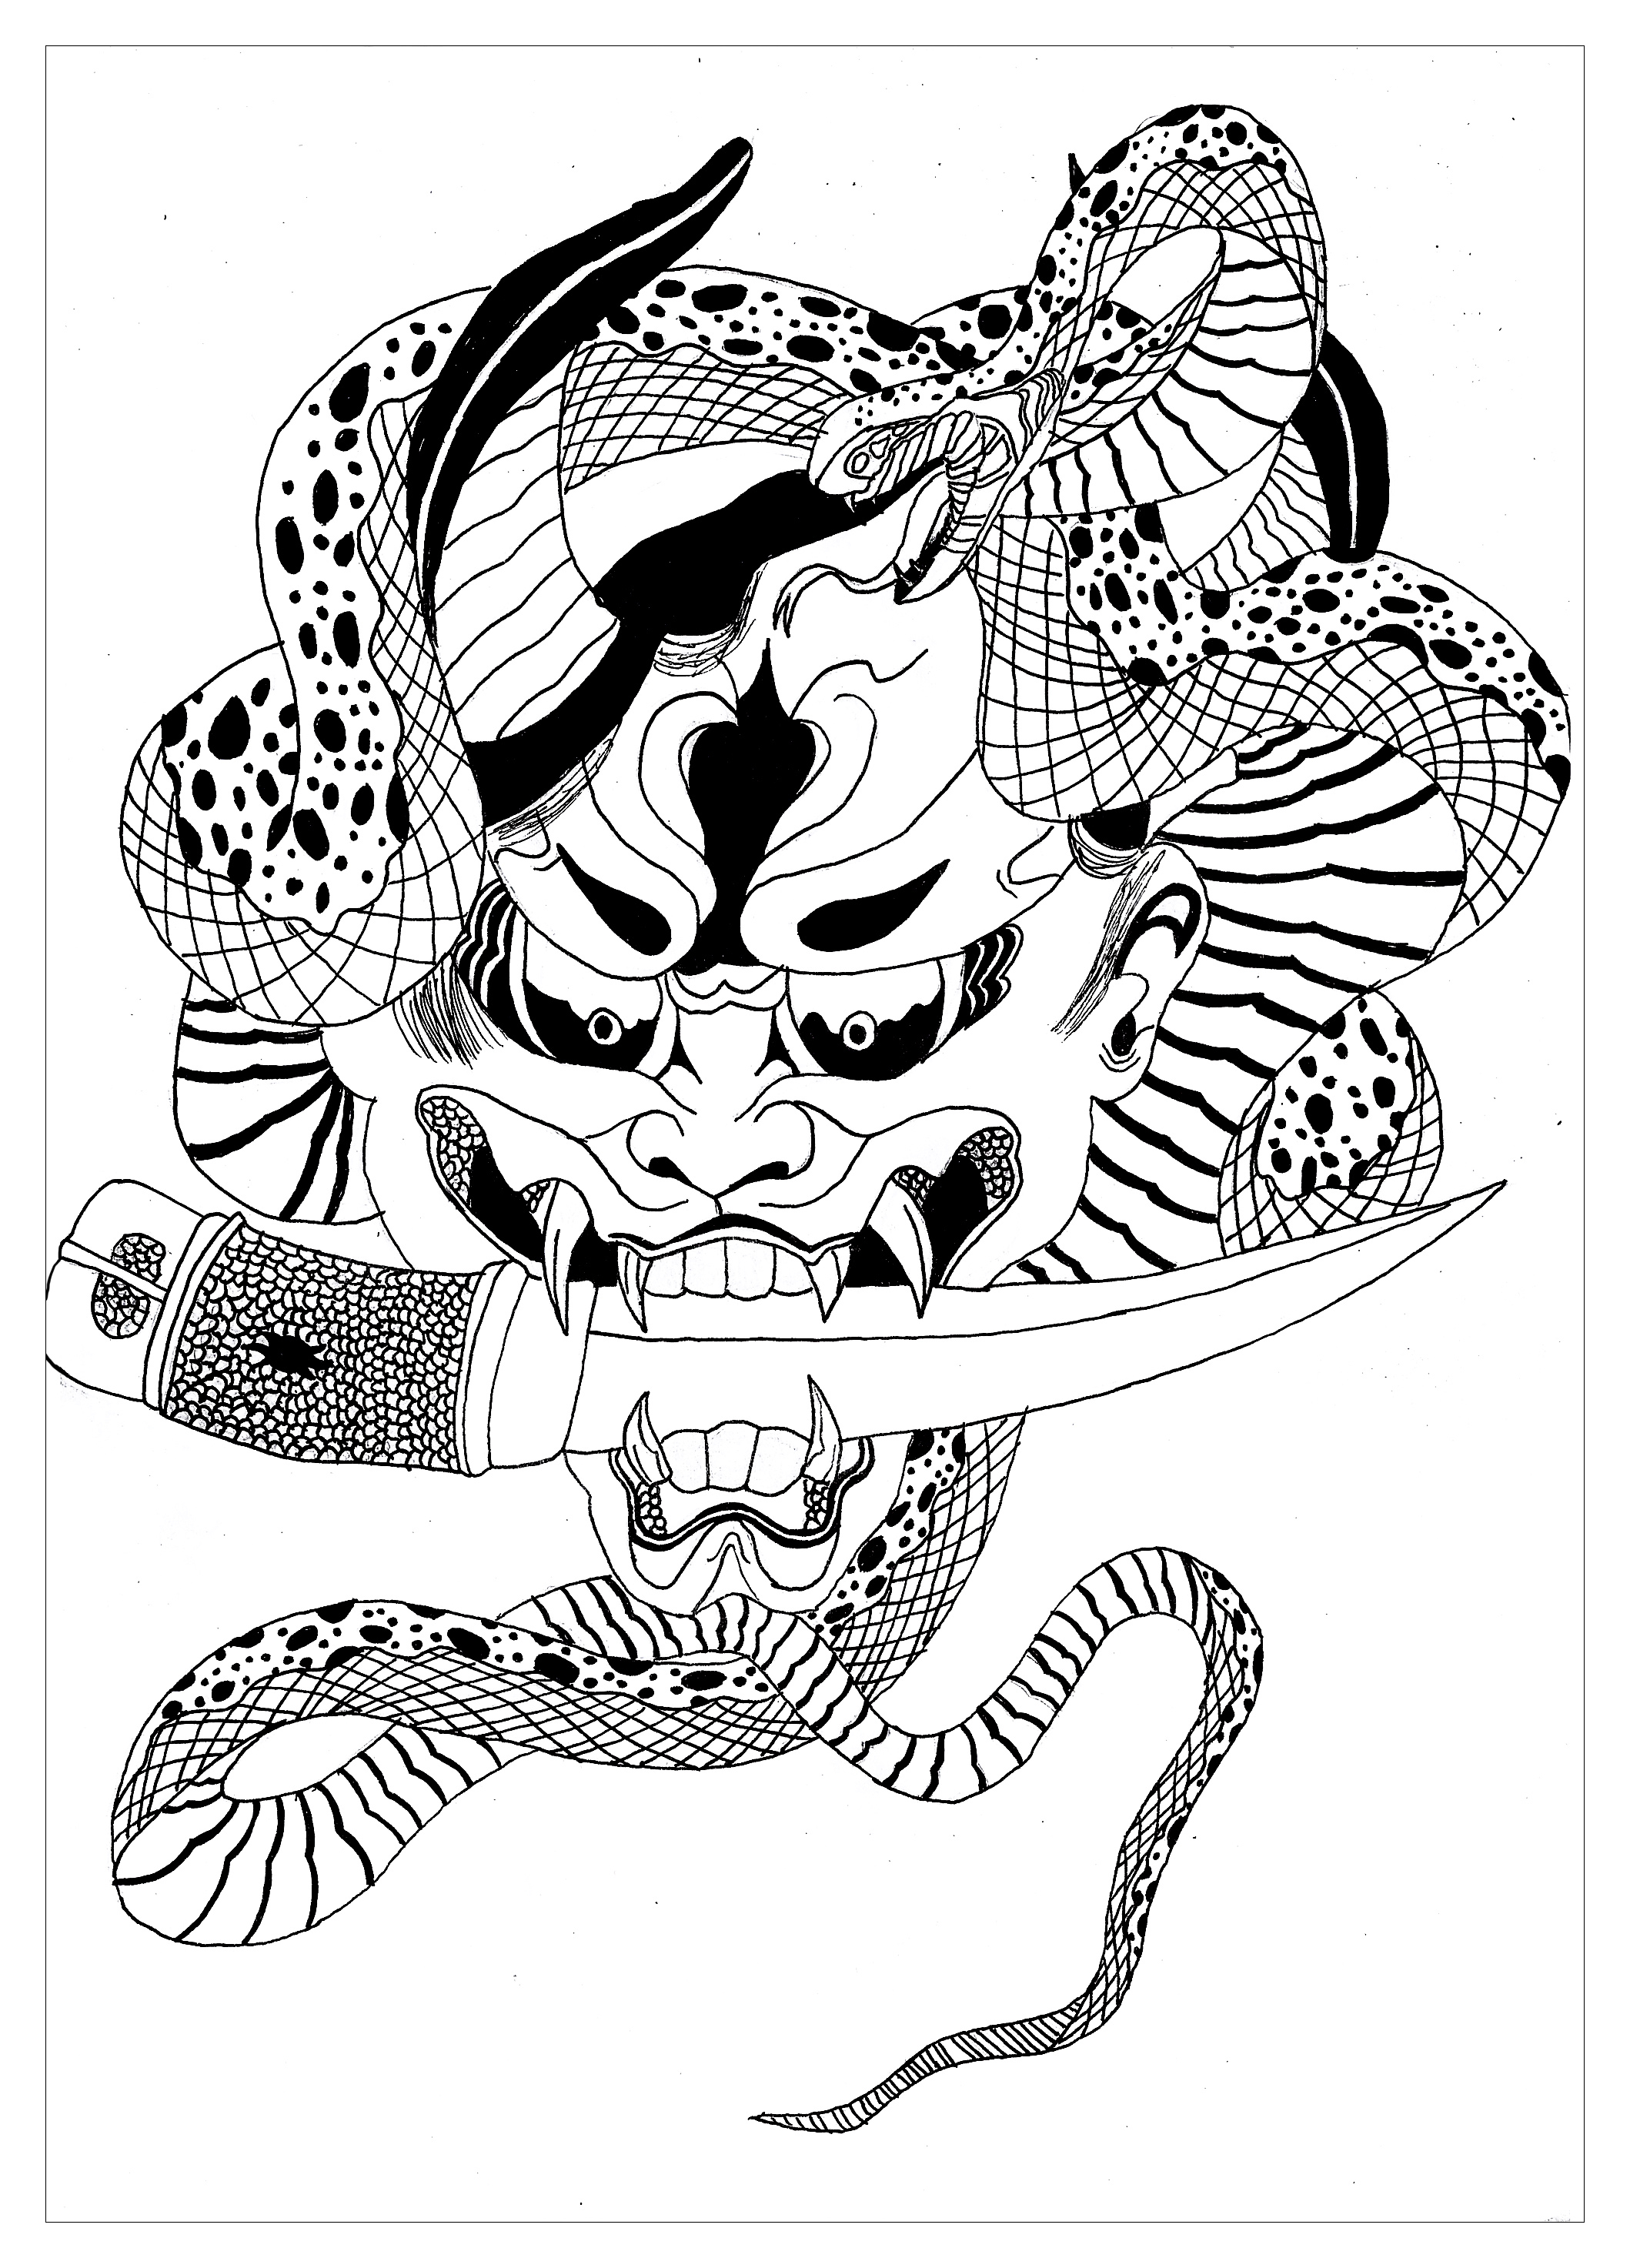  Demon  Colouring  Pages  Sketch Coloring  Page 